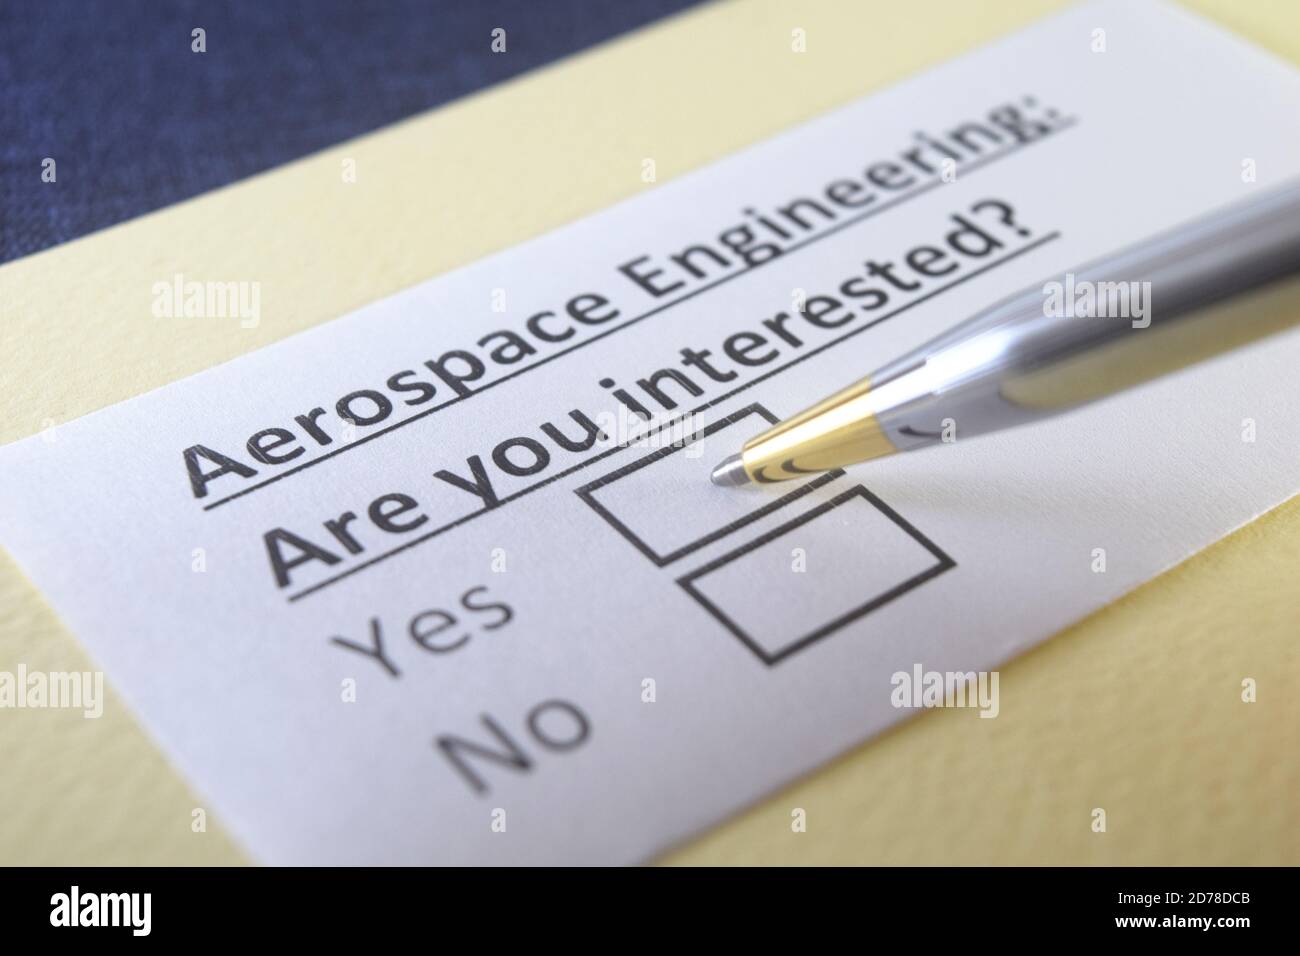 One person is answering question about aerospace engineering. Stock Photo